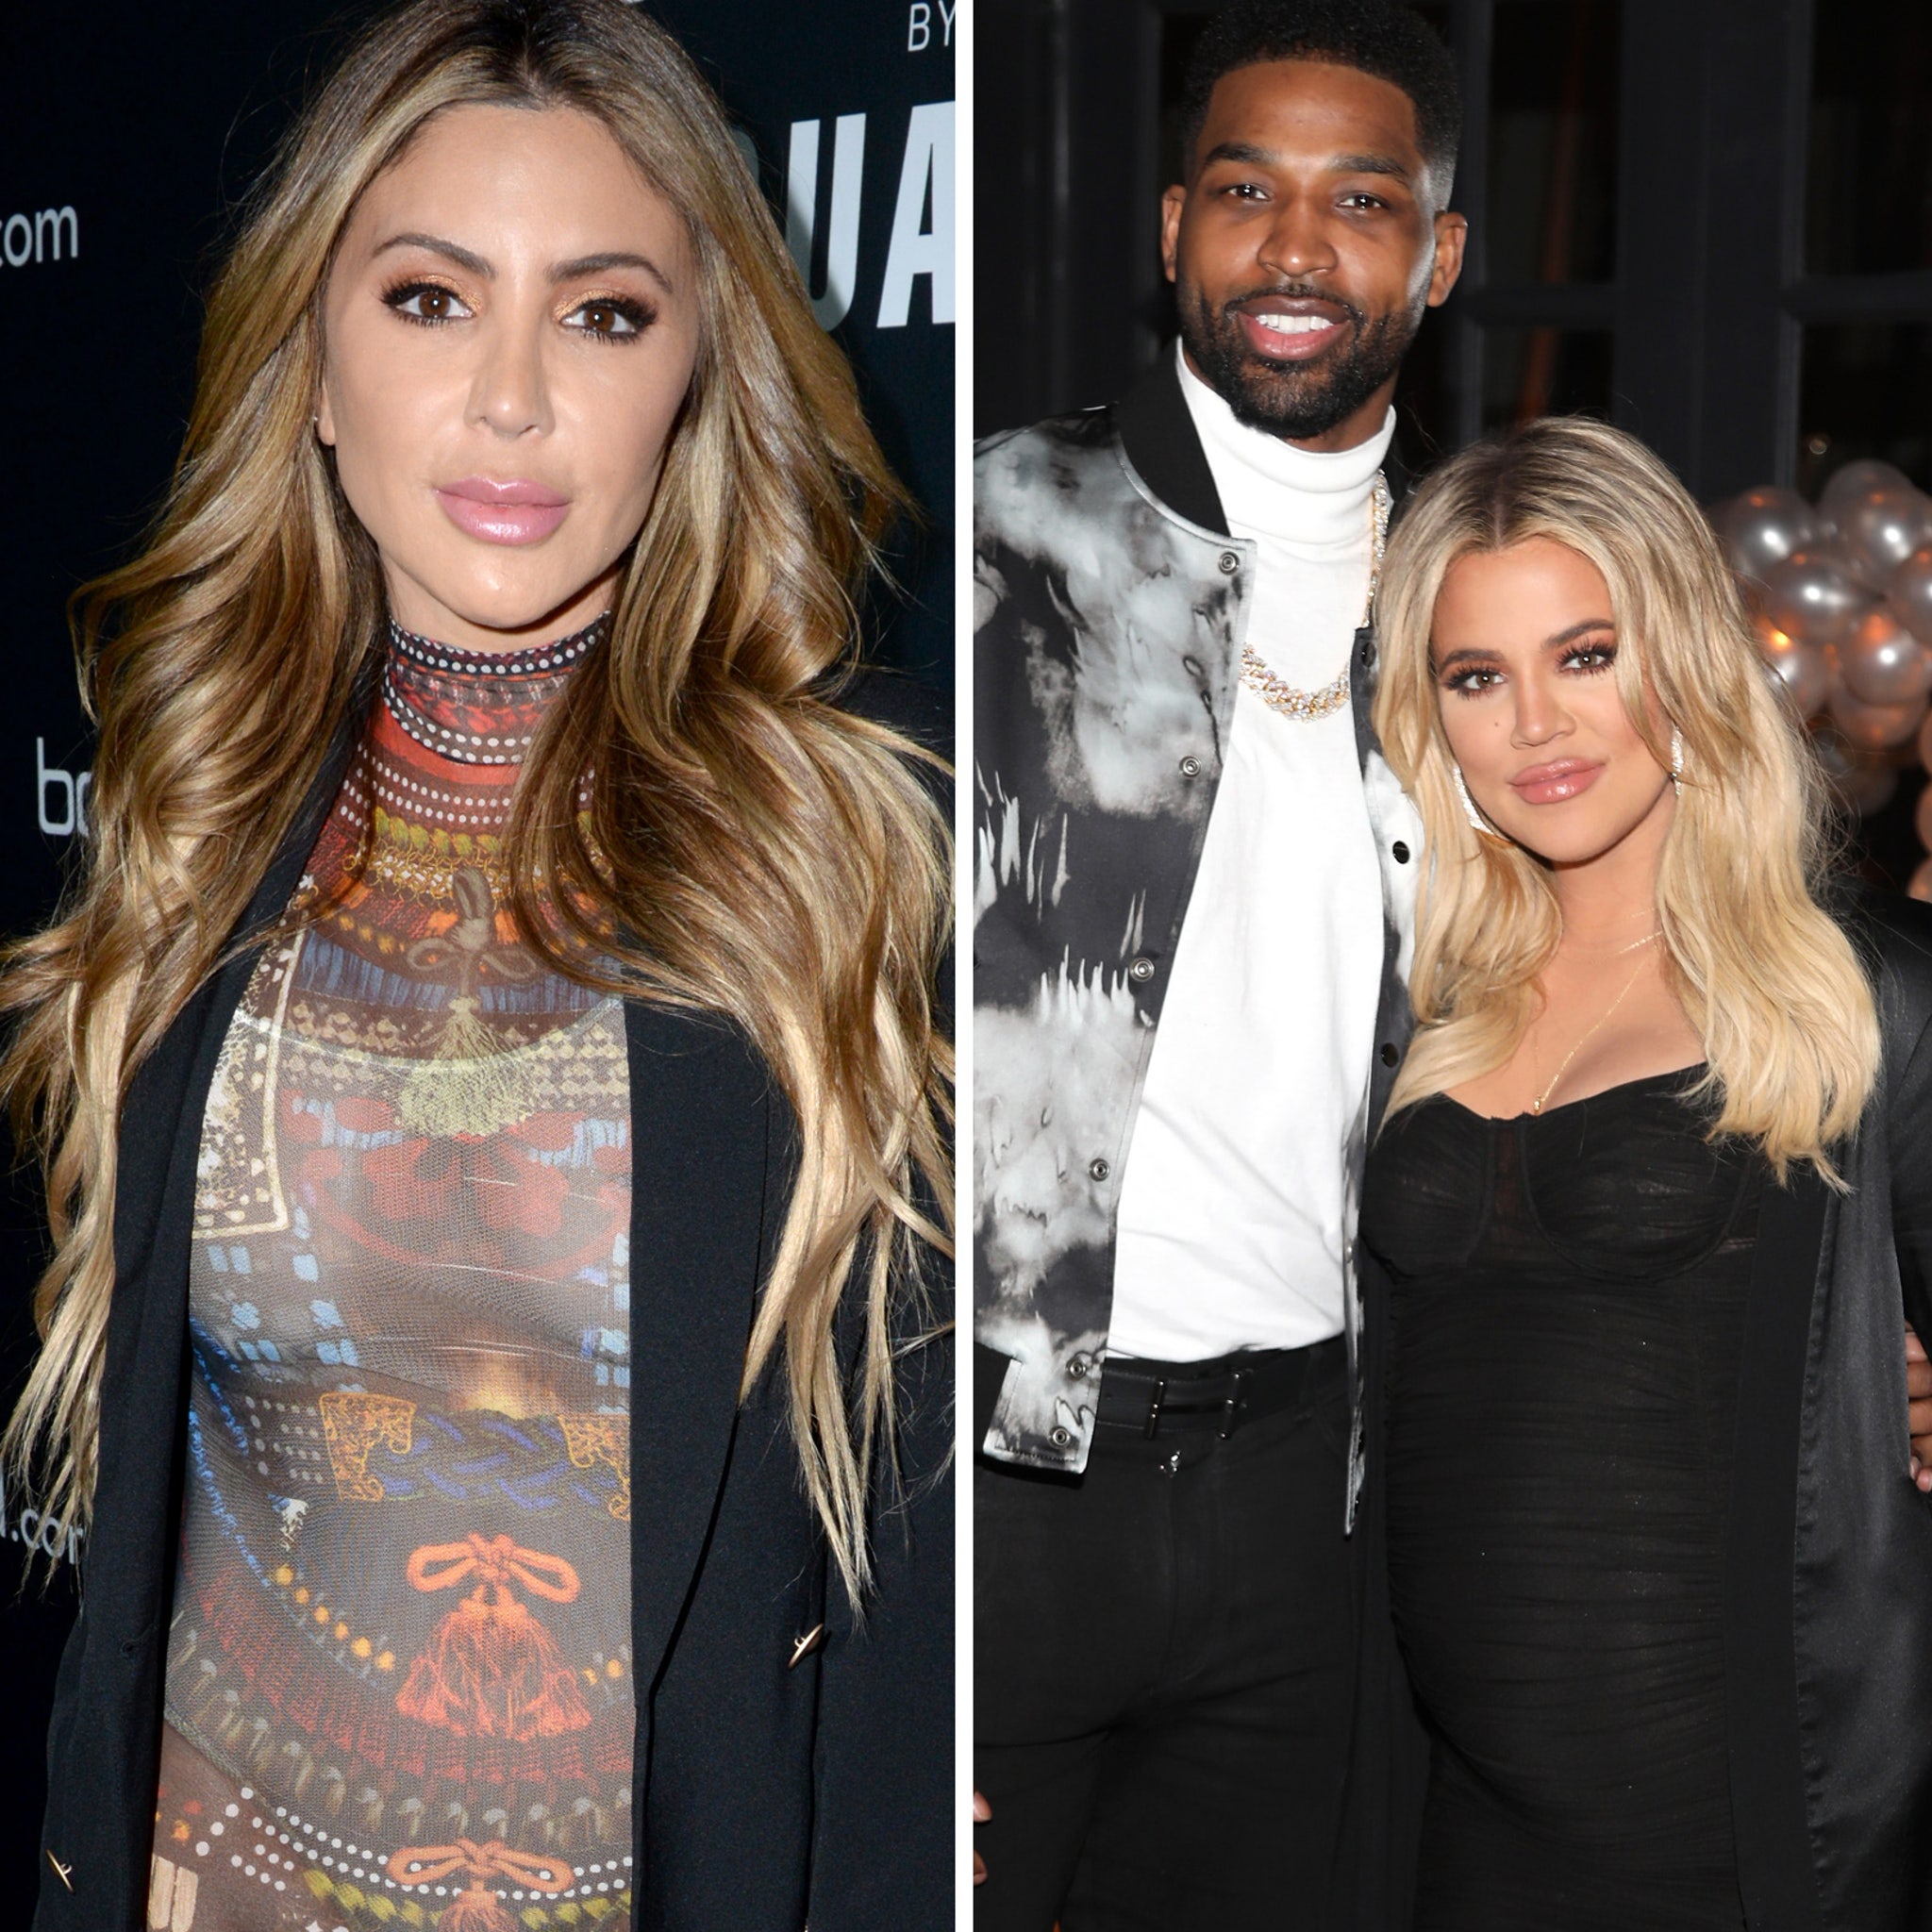 Larsa Pippen Shoots Down Tristan Thomson Hookup Rumors But Admits They Dated Before Khloe